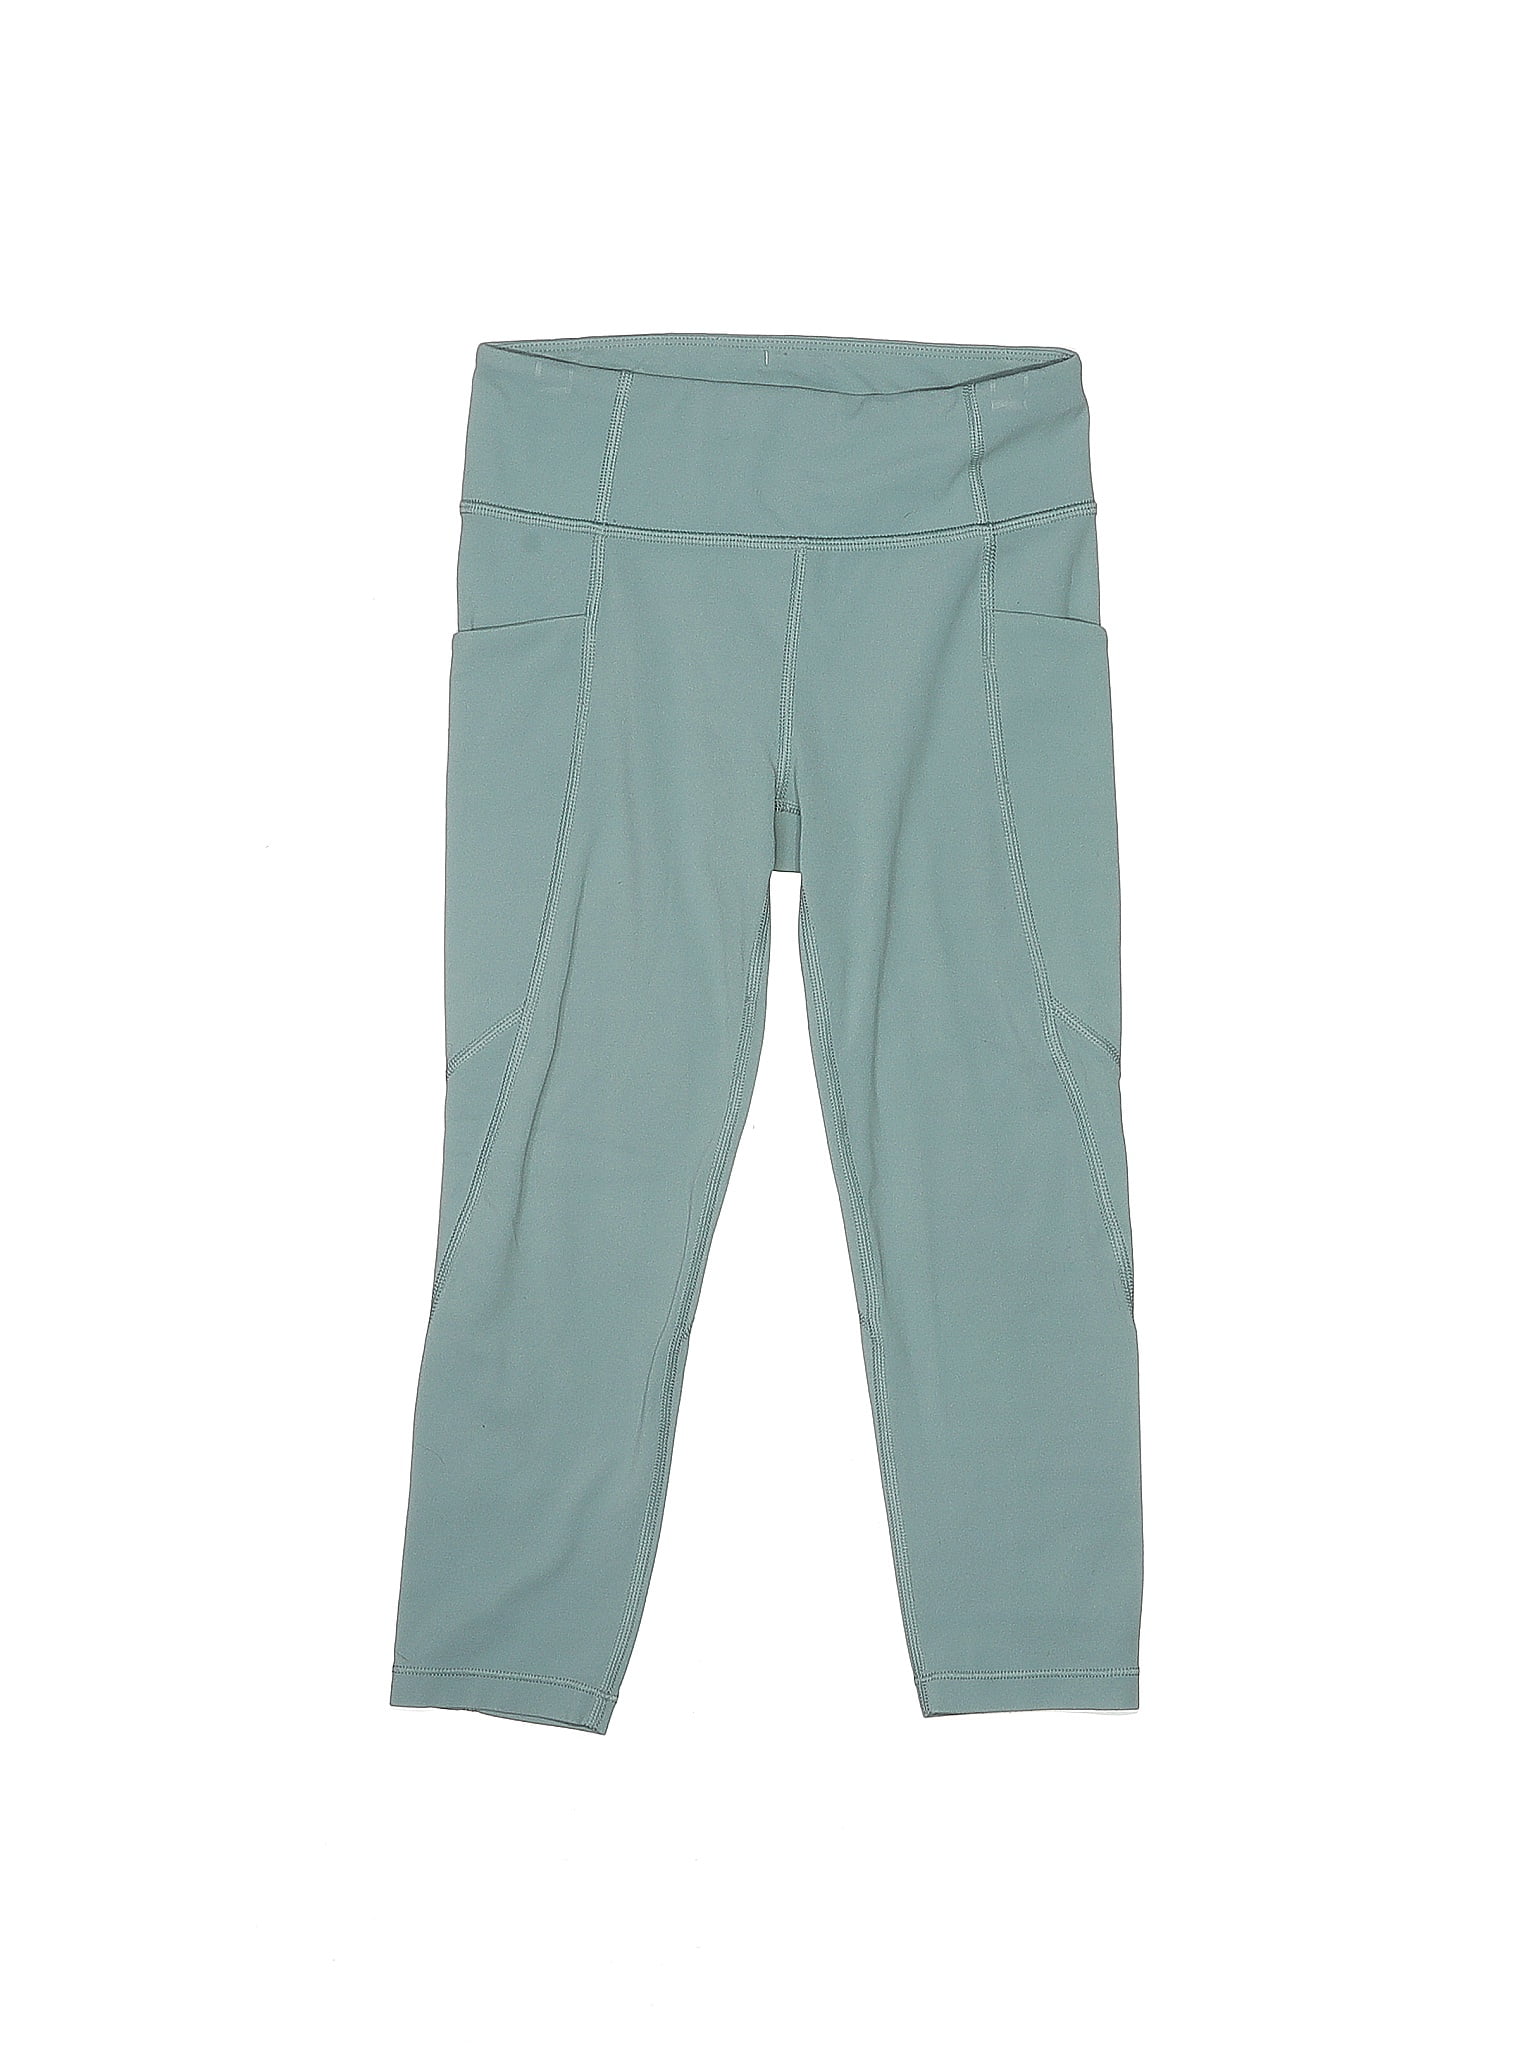 Athleta Solid Teal Active Pants Size M (Kids) - 33% off